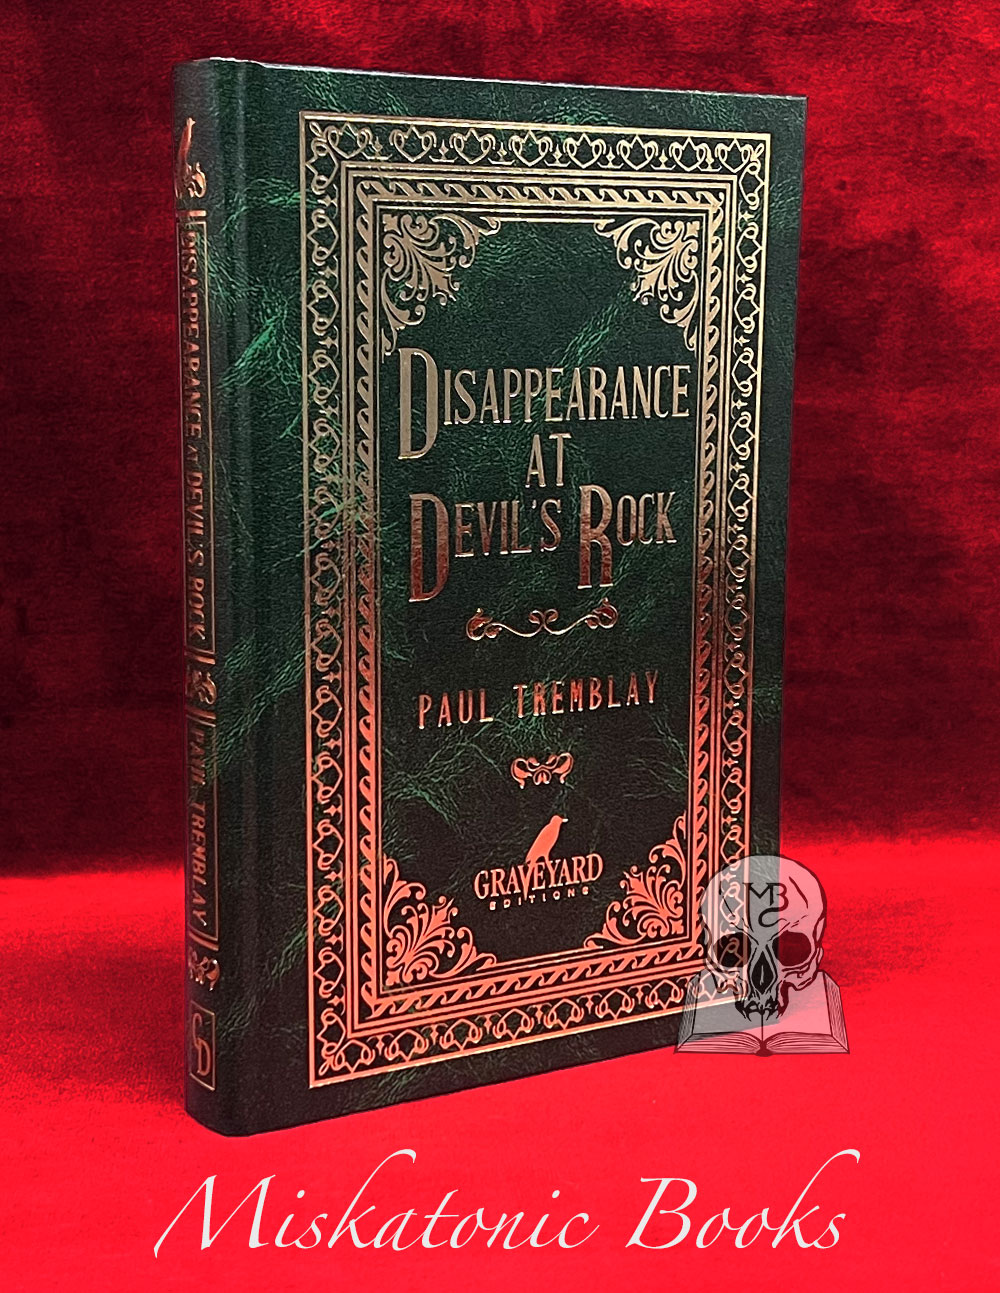 DISAPPEARANCE AT DEVIL'S ROCK by Paul Tremblay - Signed Limited Edition Hardcover (Graveyard Edition)